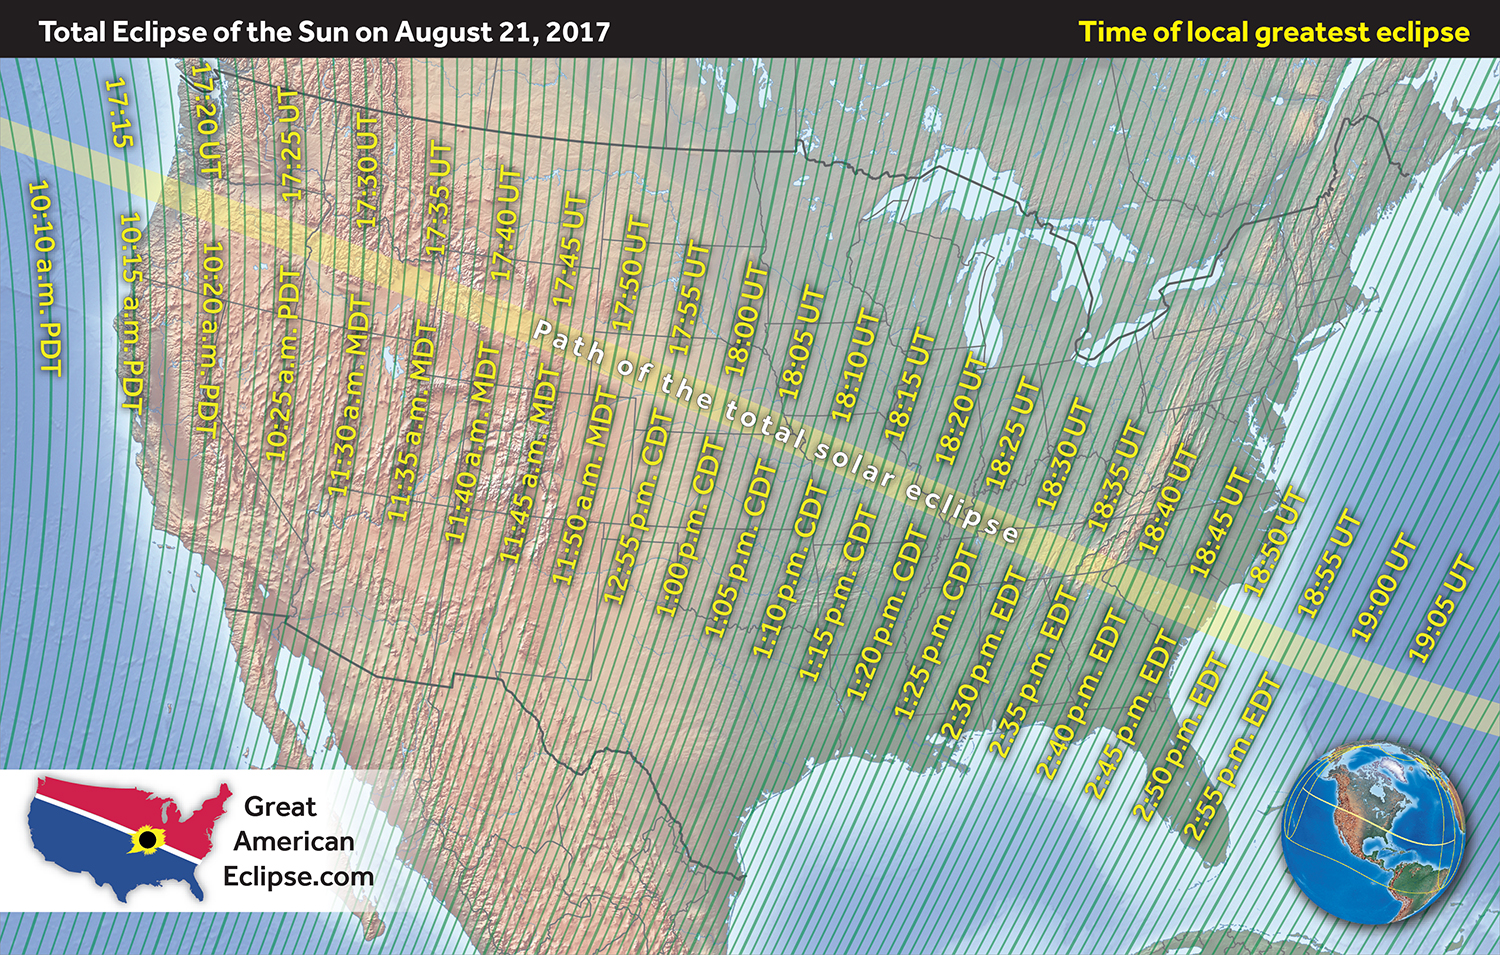 Aug. 21 - Total Eclipse of the Sun